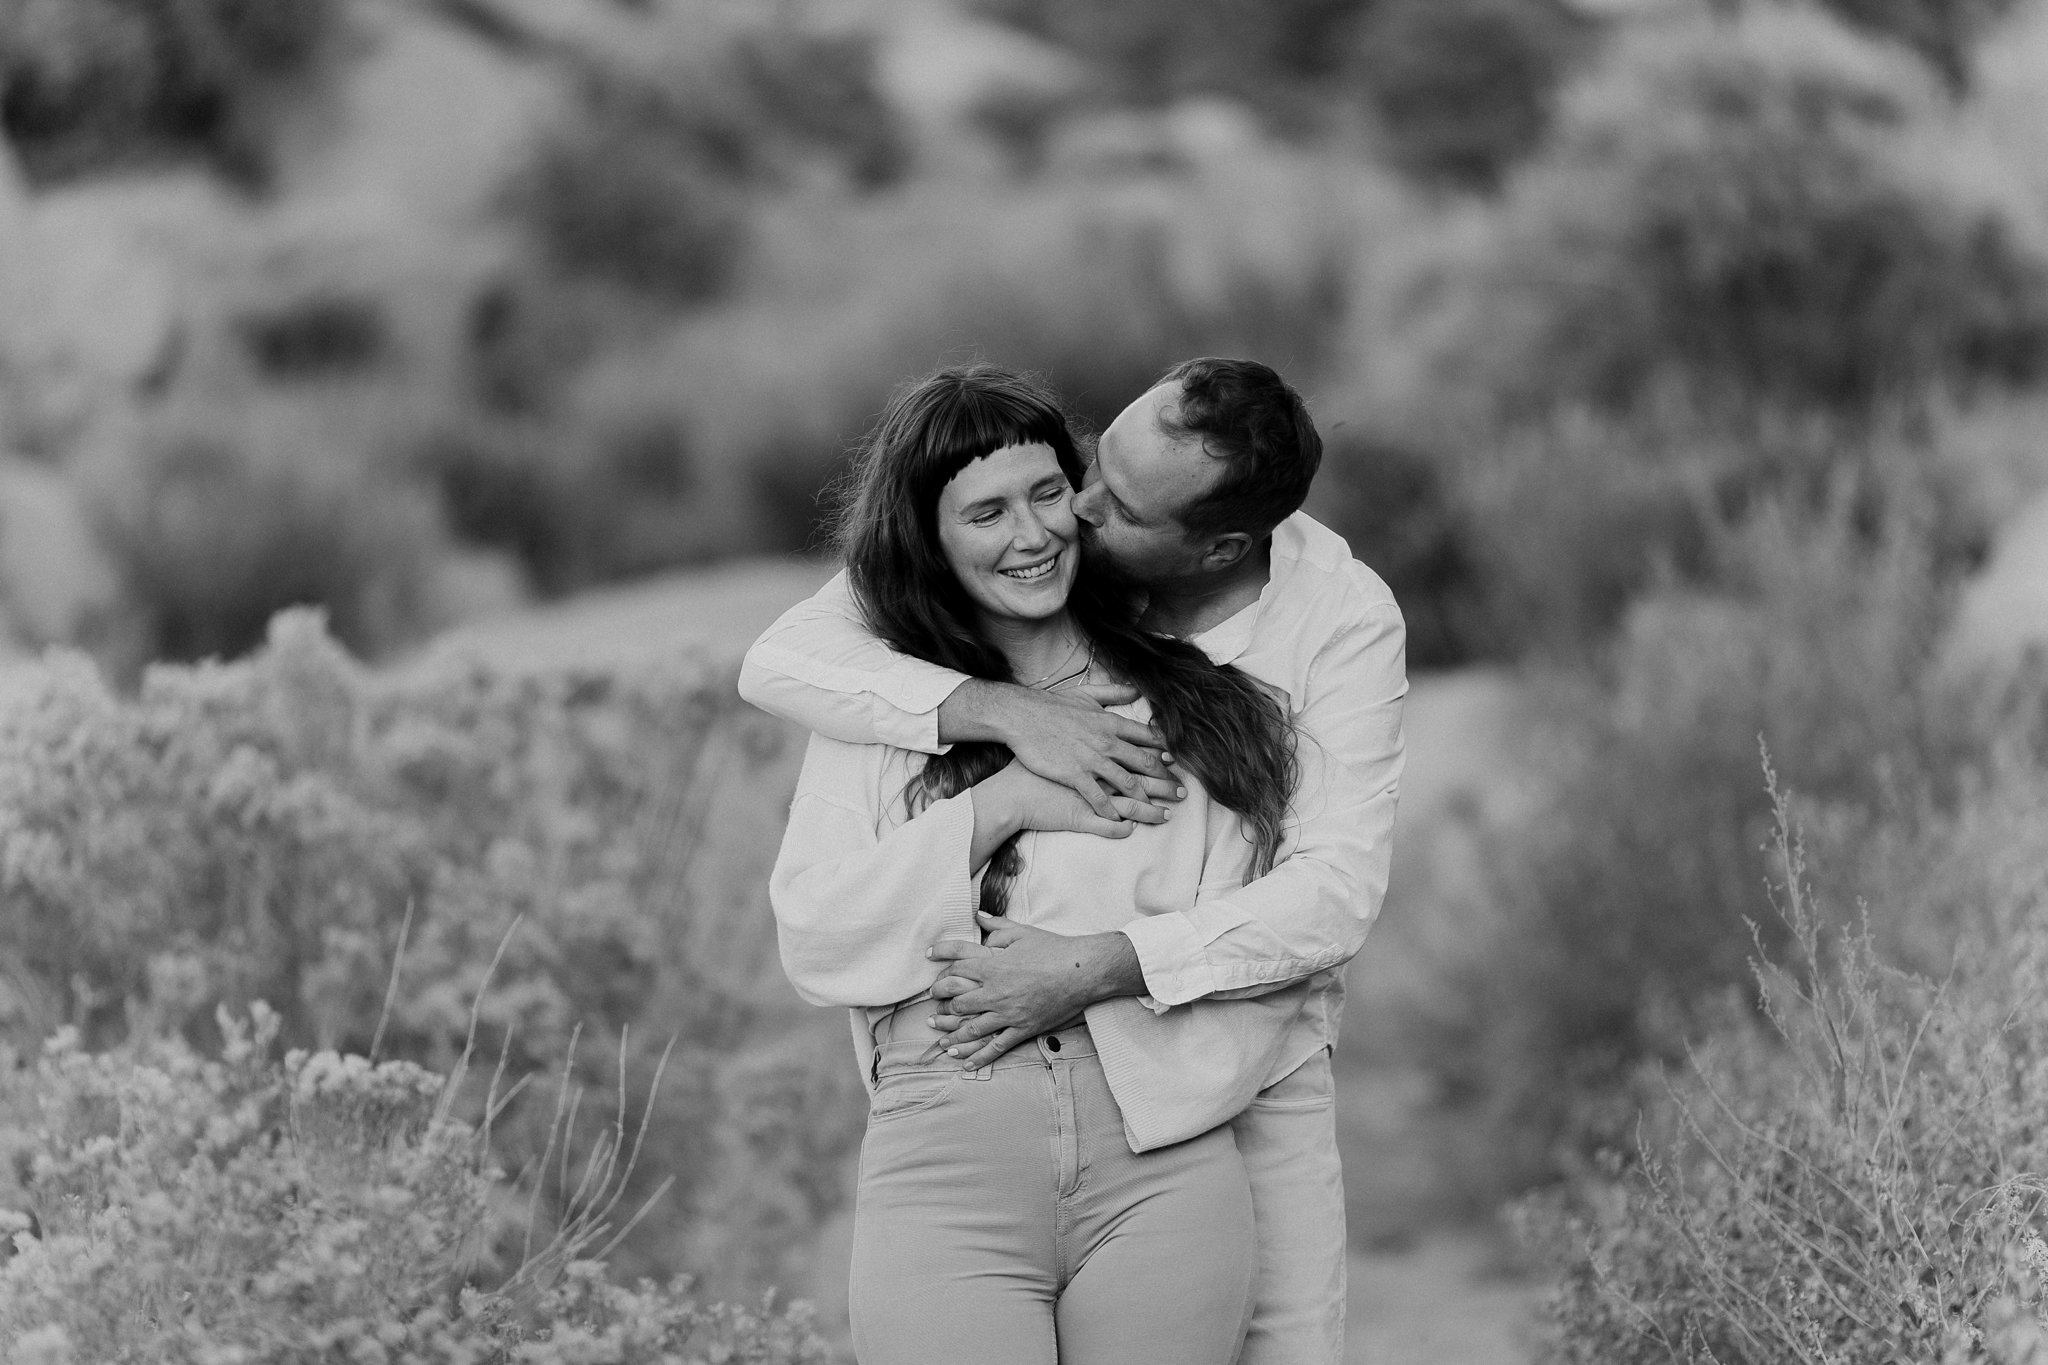 Alicia+lucia+photography+-+albuquerque+wedding+photographer+-+santa+fe+wedding+photography+-+new+mexico+wedding+photographer+-+new+mexico+wedding+-+desert+engagement+-+foothills+engagement+-+mountain+engagement_0007.jpg